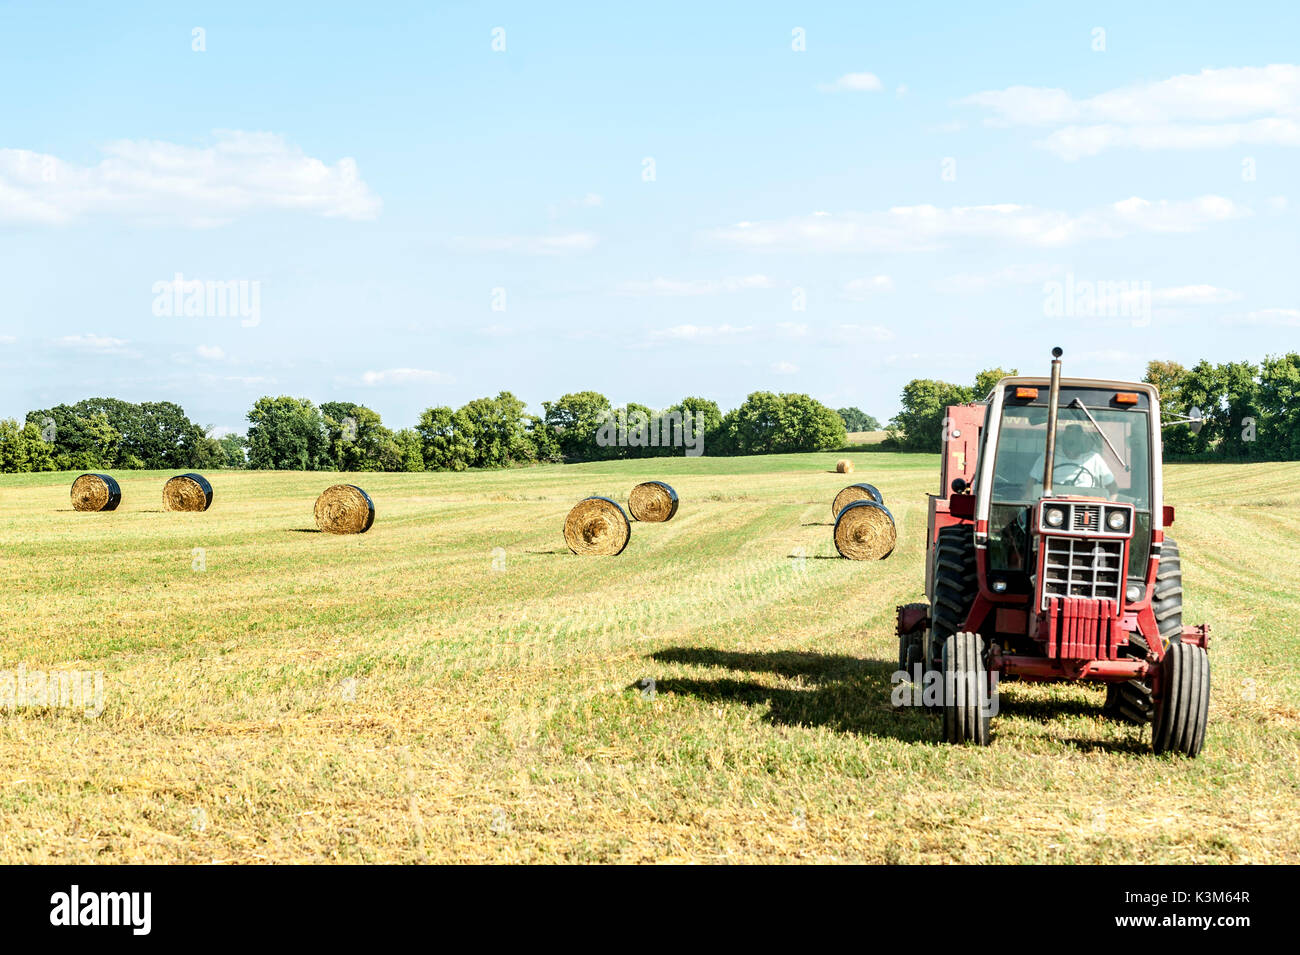 Hay Bale Agriculture Straw Haystack Stock Photo Alamy